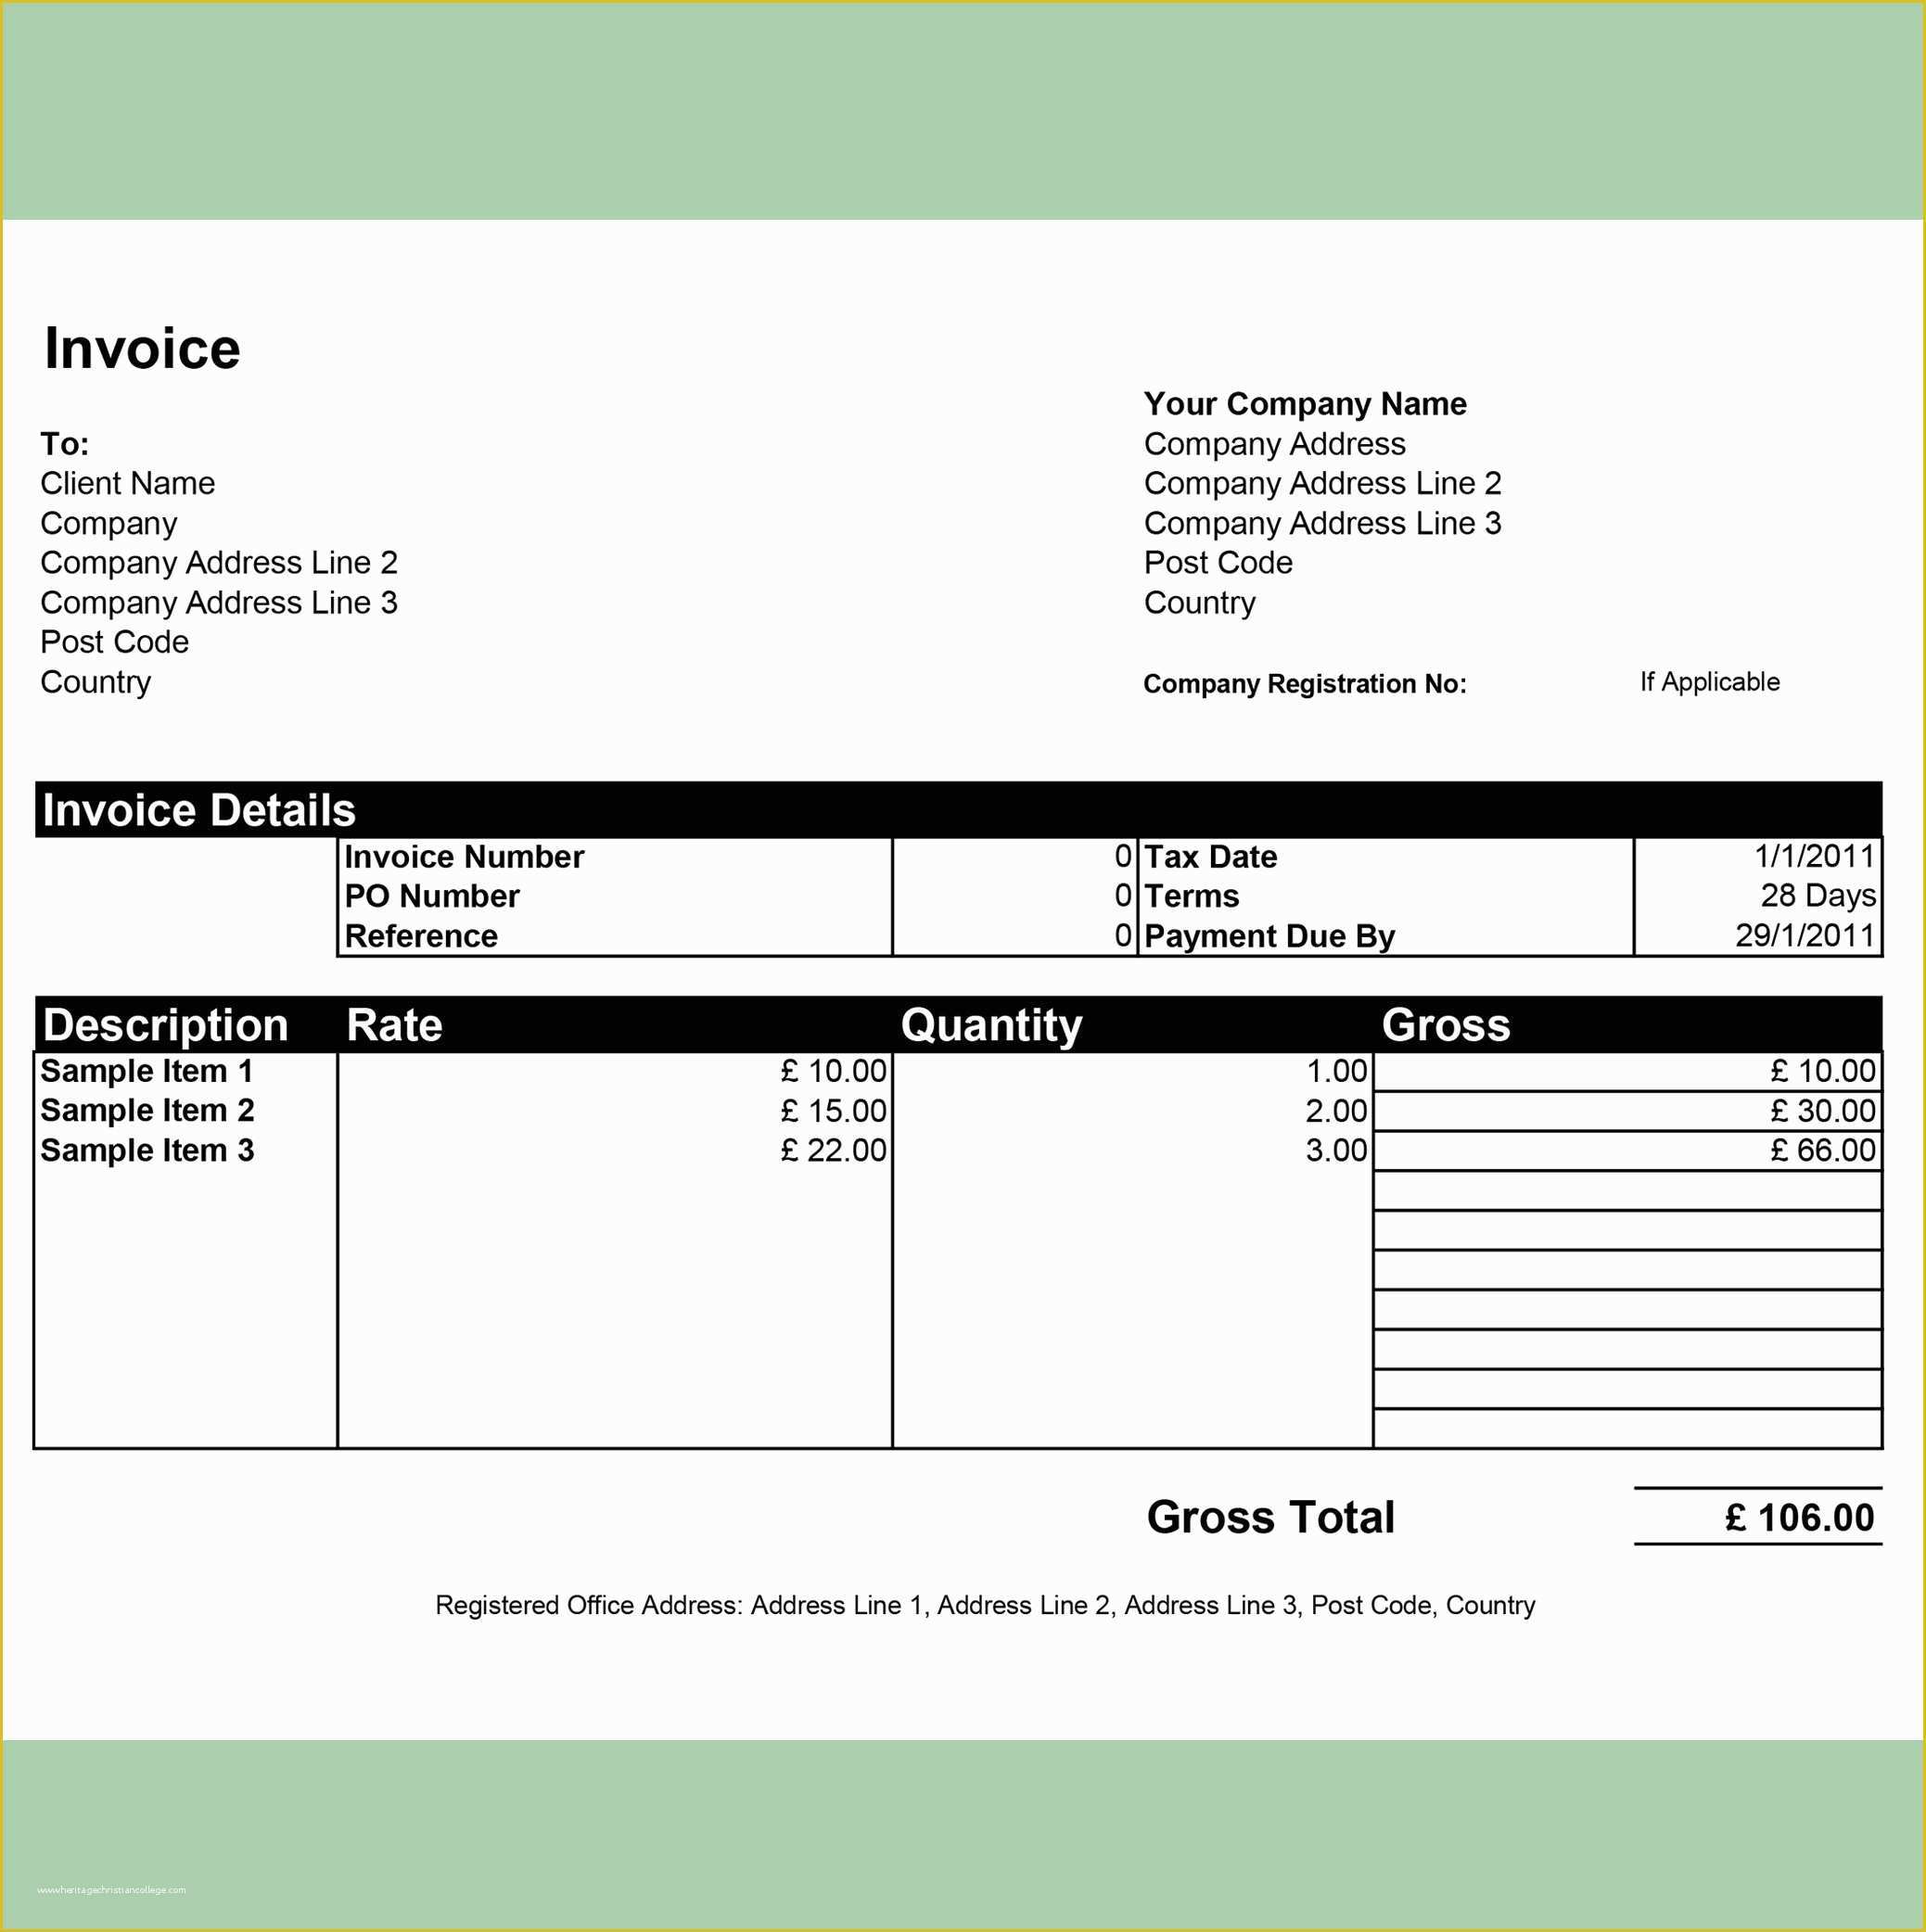 Free Invoice Template Excel Of Free Invoice Templates by Invoiceberry the Grid System